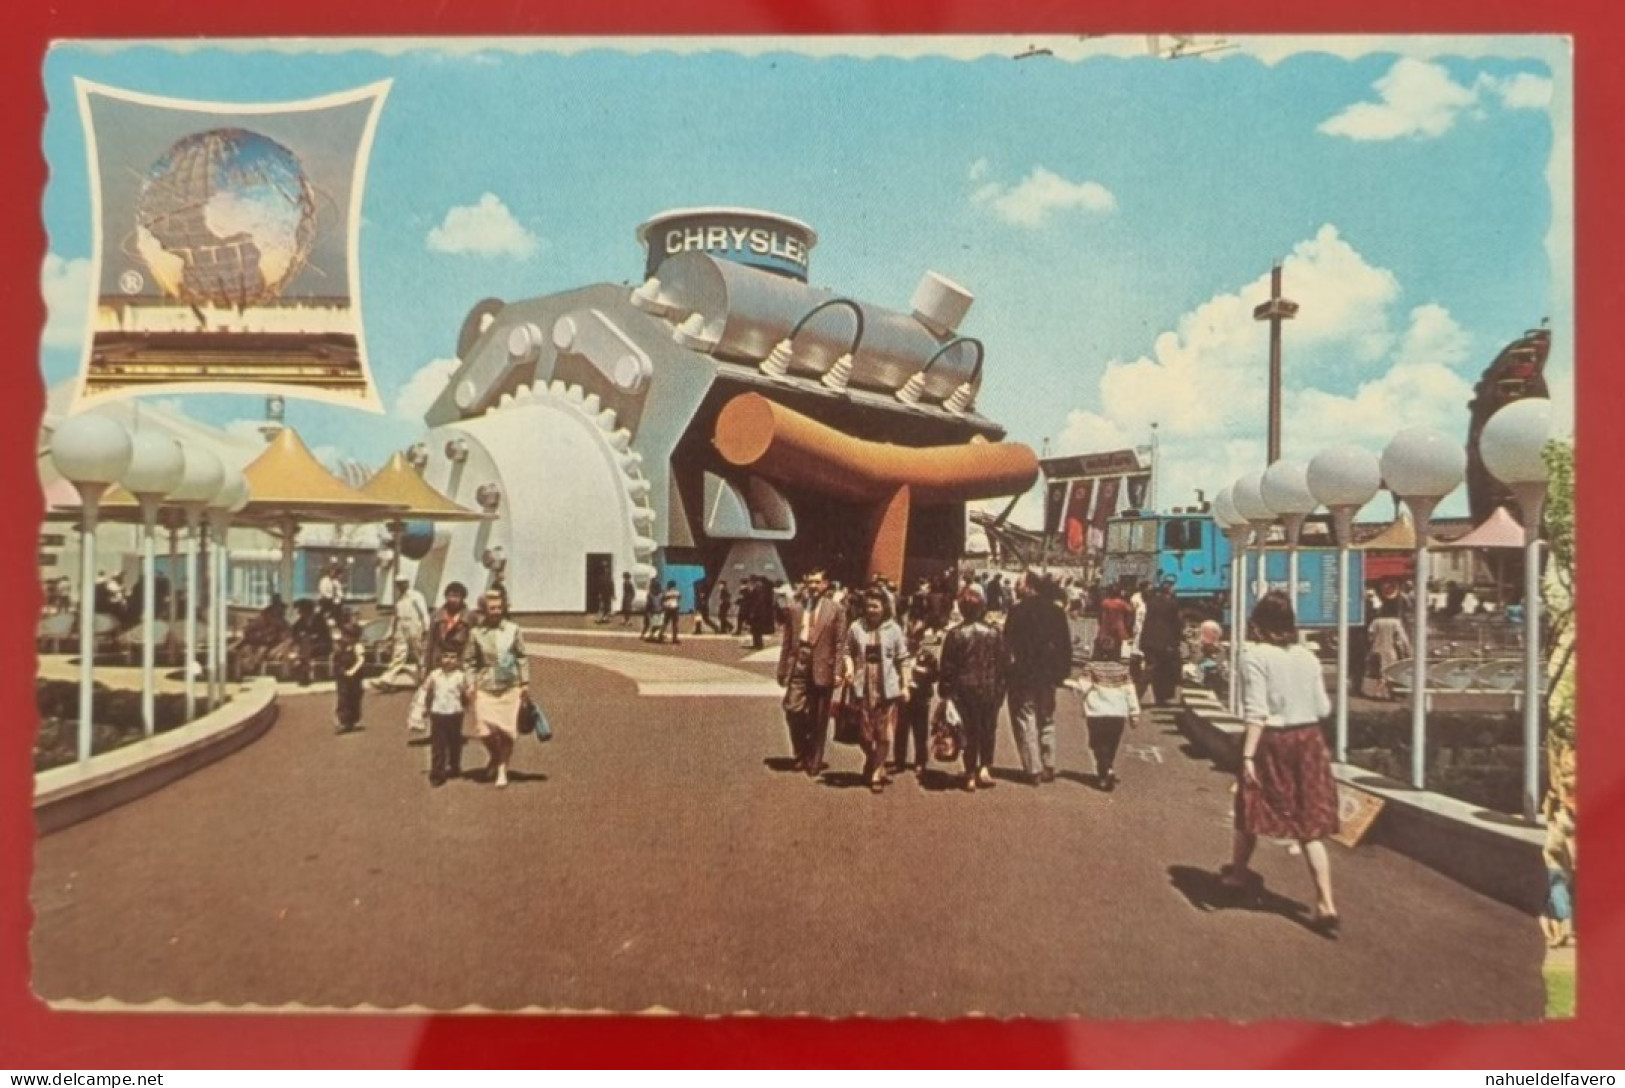 Uncirculated Postcard - USA - NY, NEW YORK WORLD'S FAIR 1964-65 - THIS IS CHRYSKER CORPORATION'S GIANT - Exhibitions